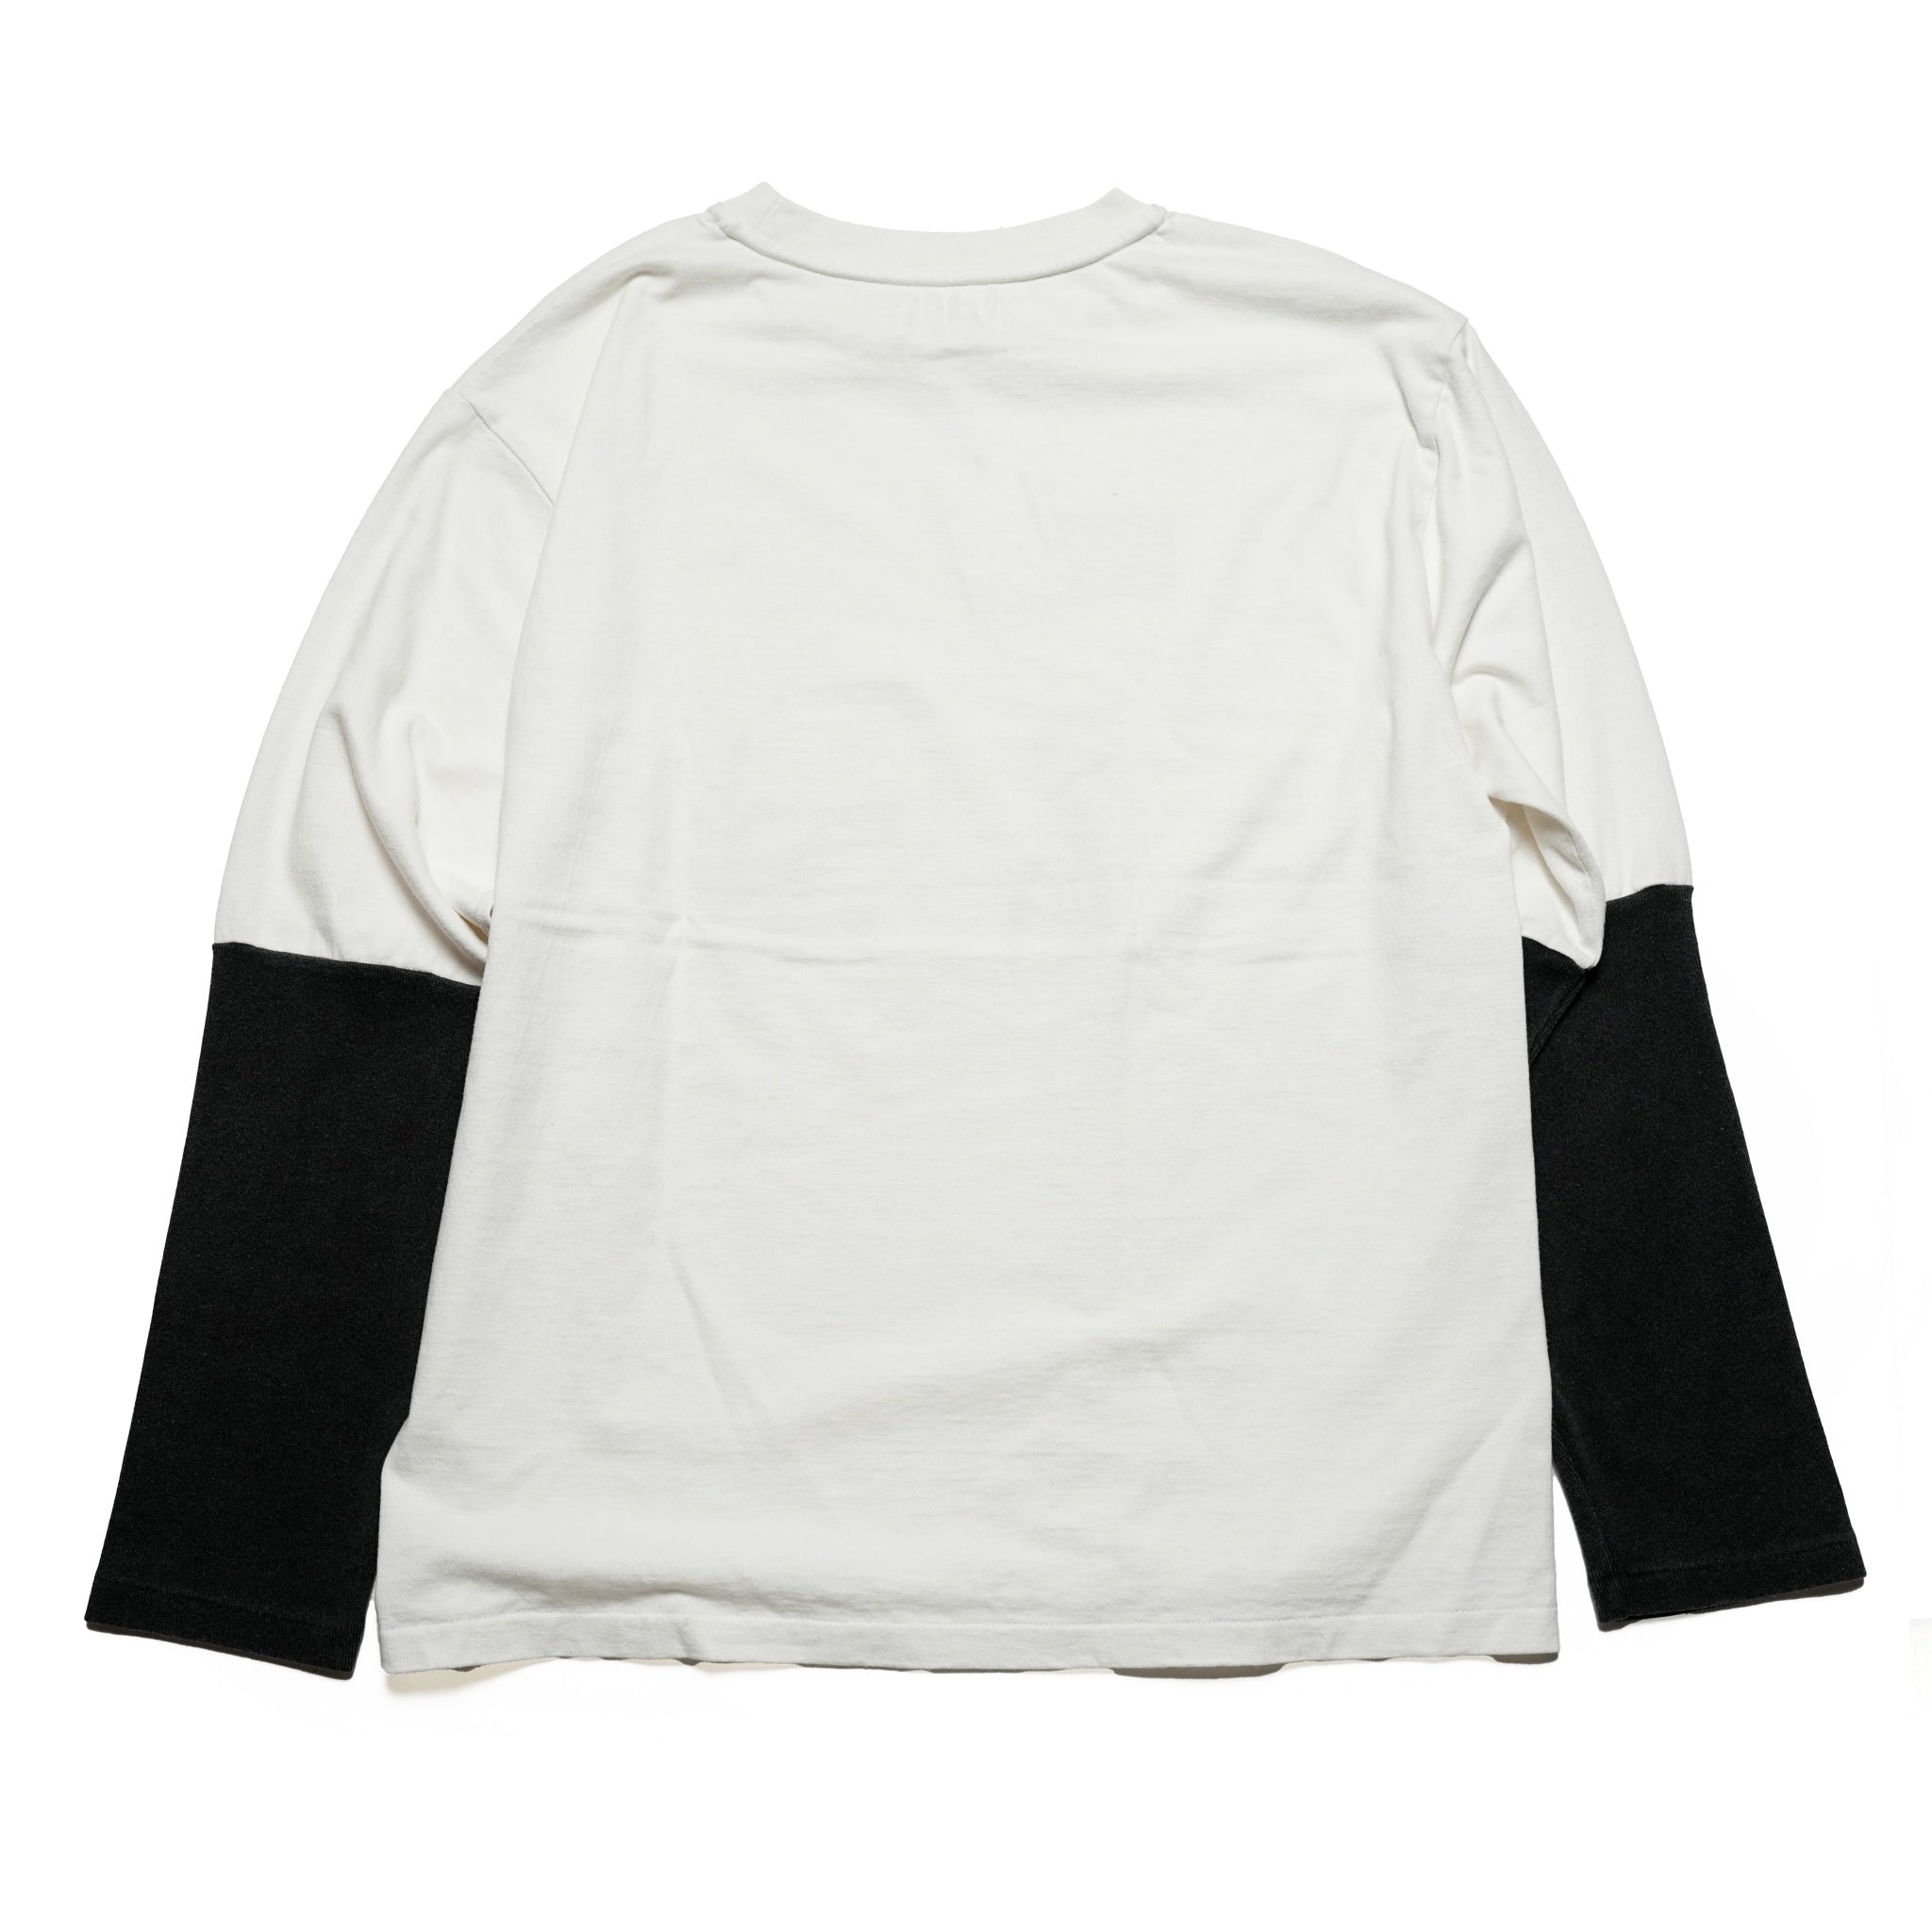 No:24＃03-1B30-0_White | Name:GARAGE-ロンTEE-STAND HER | Color:White【MINAMI ANDERSON_ミナミアンダーソン】【入荷予定アイテム・入荷連絡可能】